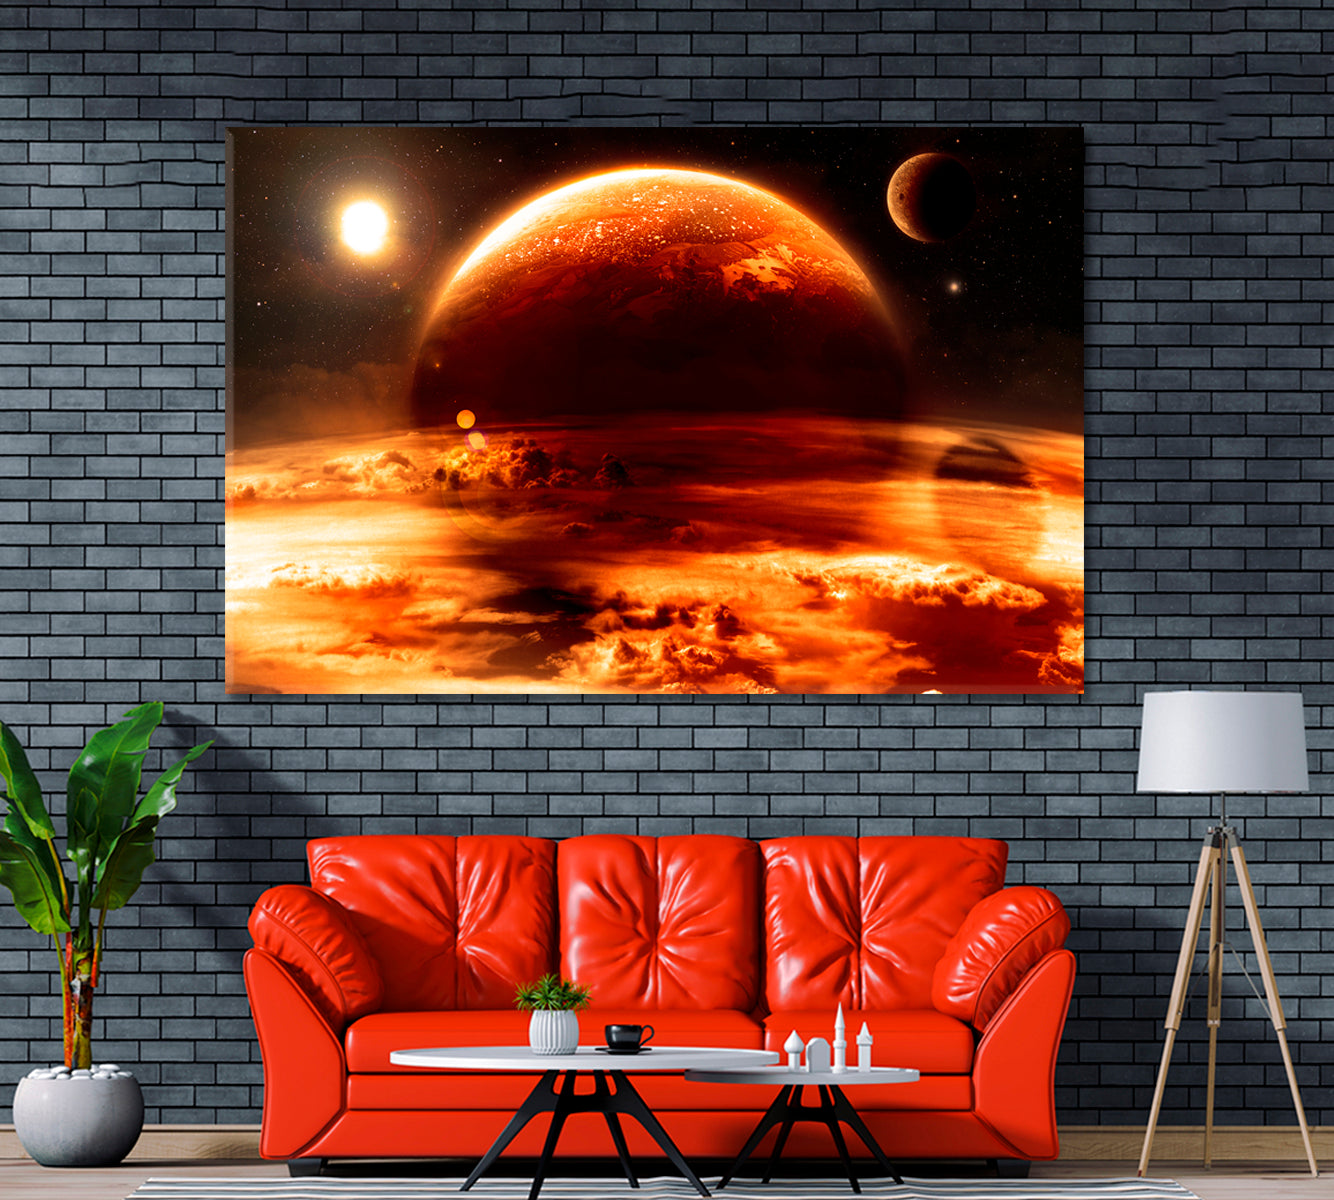 Red Alien World Canvas Print ArtLexy 1 Panel 24"x16" inches 